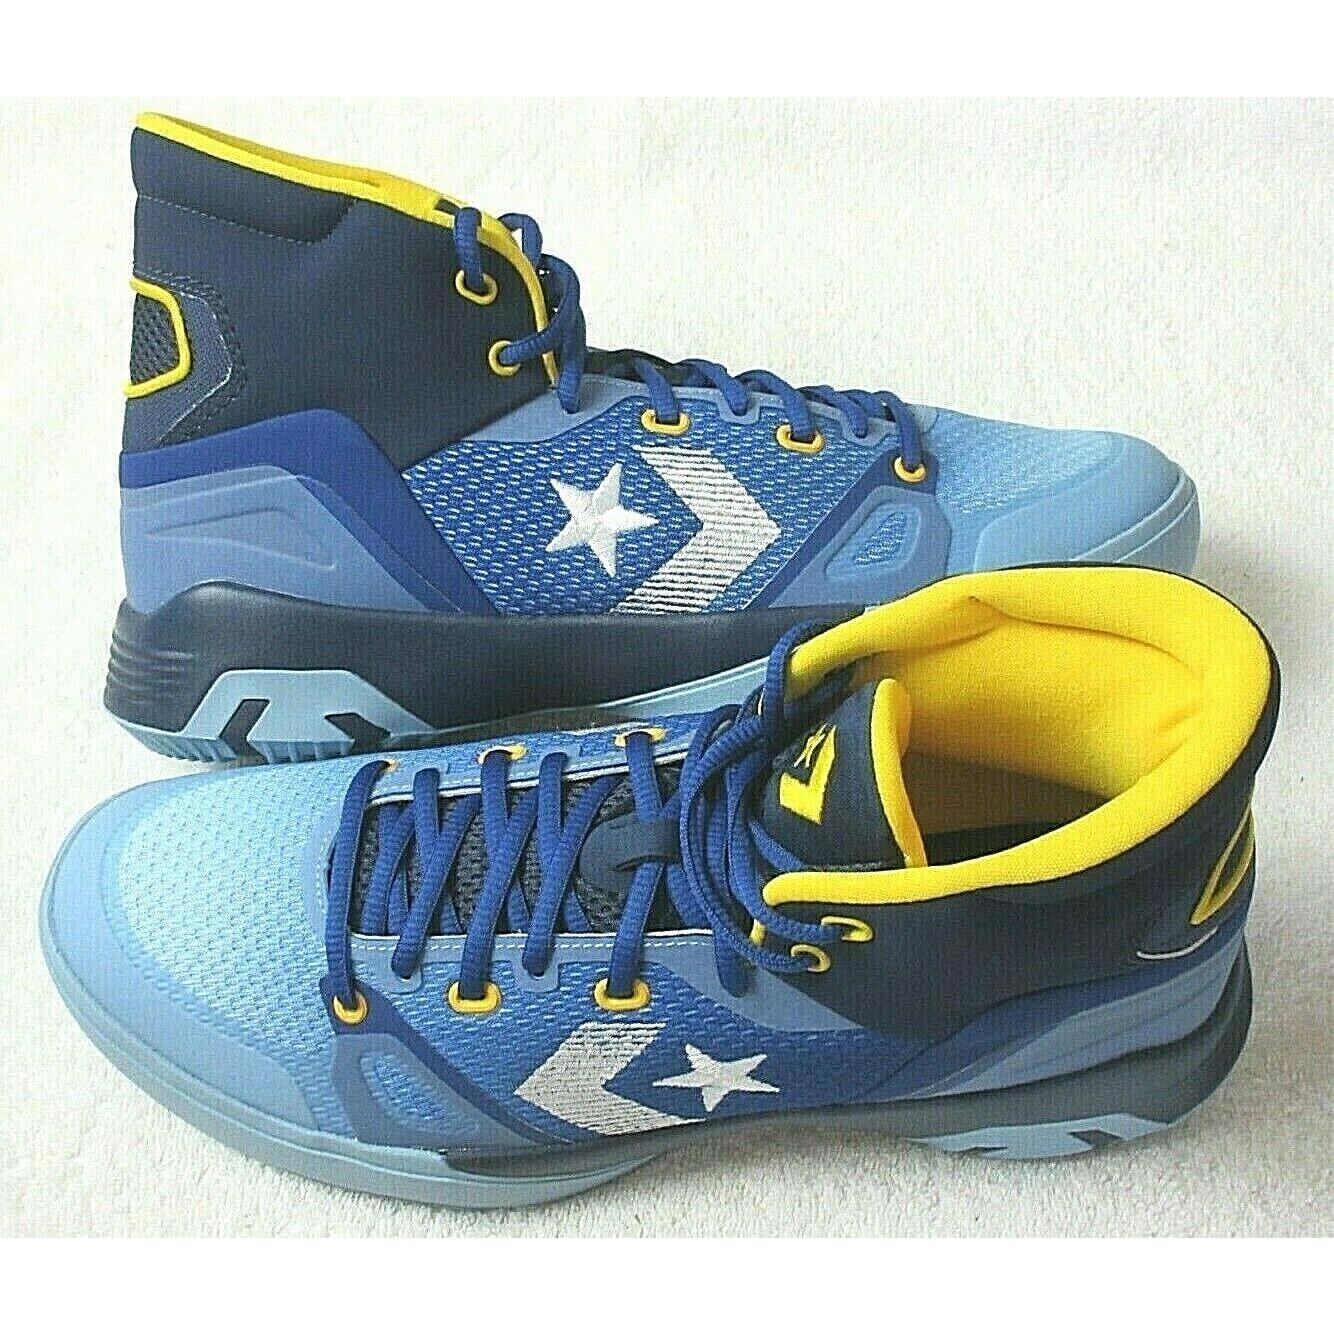 Converse Mens G4 Heart Of The City Basketball Shoes Size Sea Blue Size 9.5